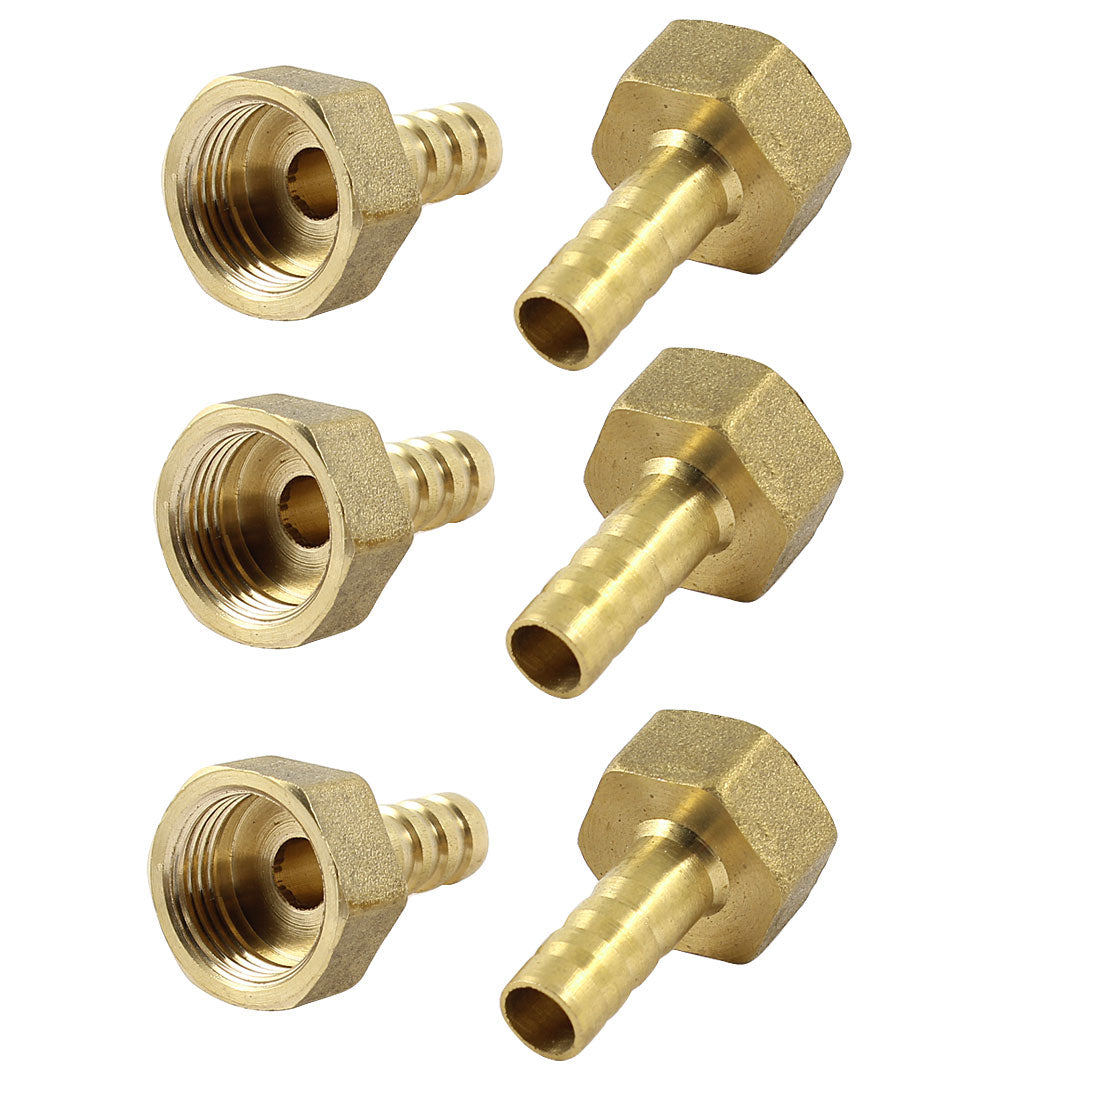 uxcell Uxcell 6pcs Brass 8mm Hose Barb to 3/8 PT Female Threaded Air Water Gas Quick Coupling Connector Fitting Adapter